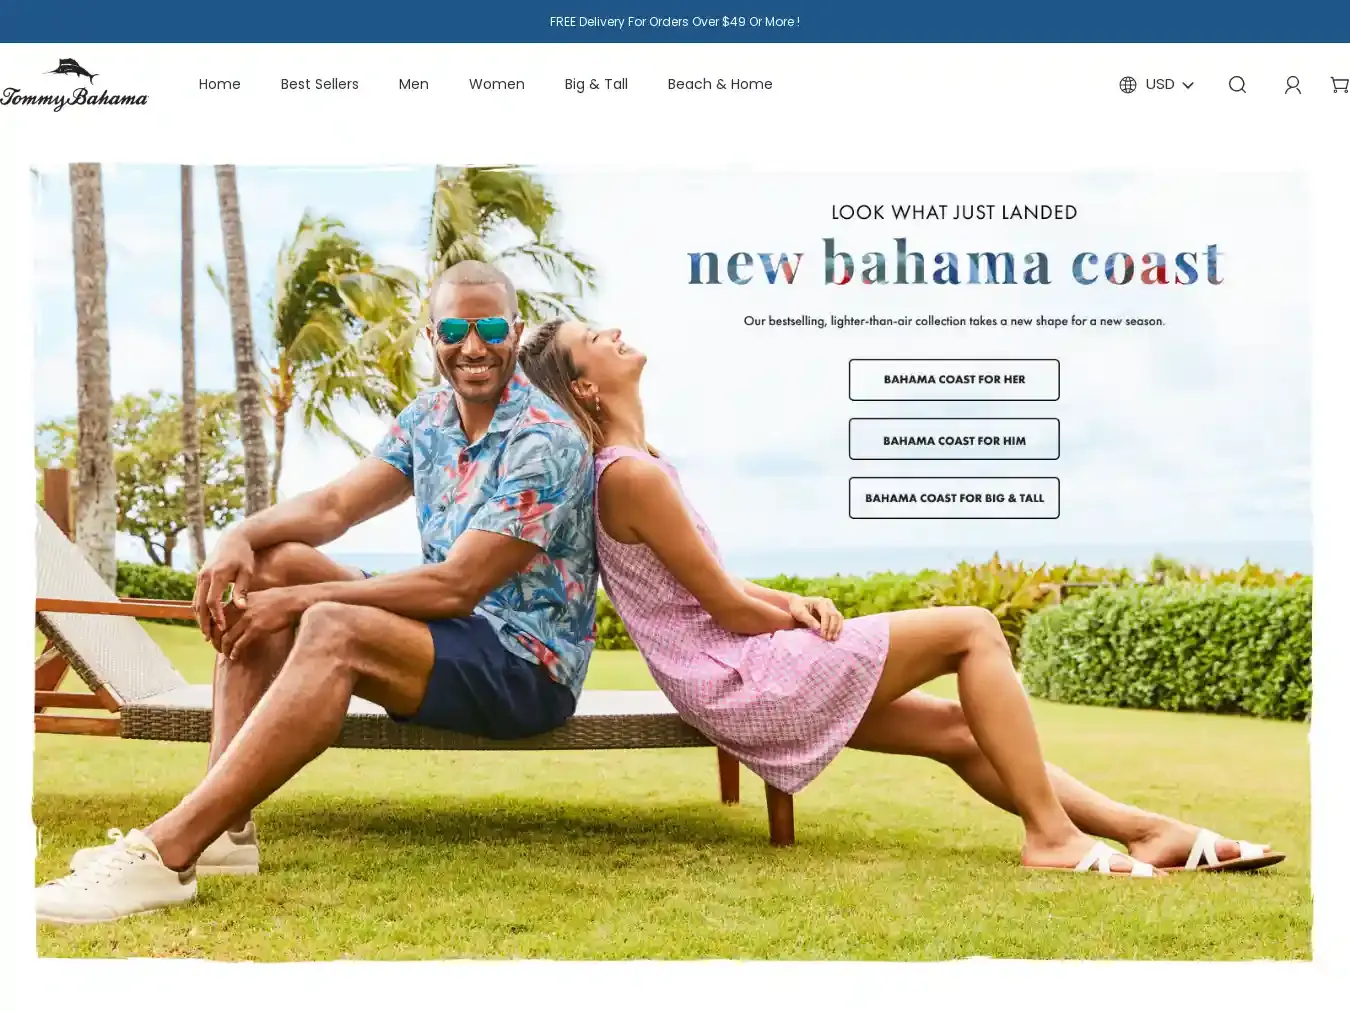 Tommybahama-us.com Fraudulent Non-Delivery website.